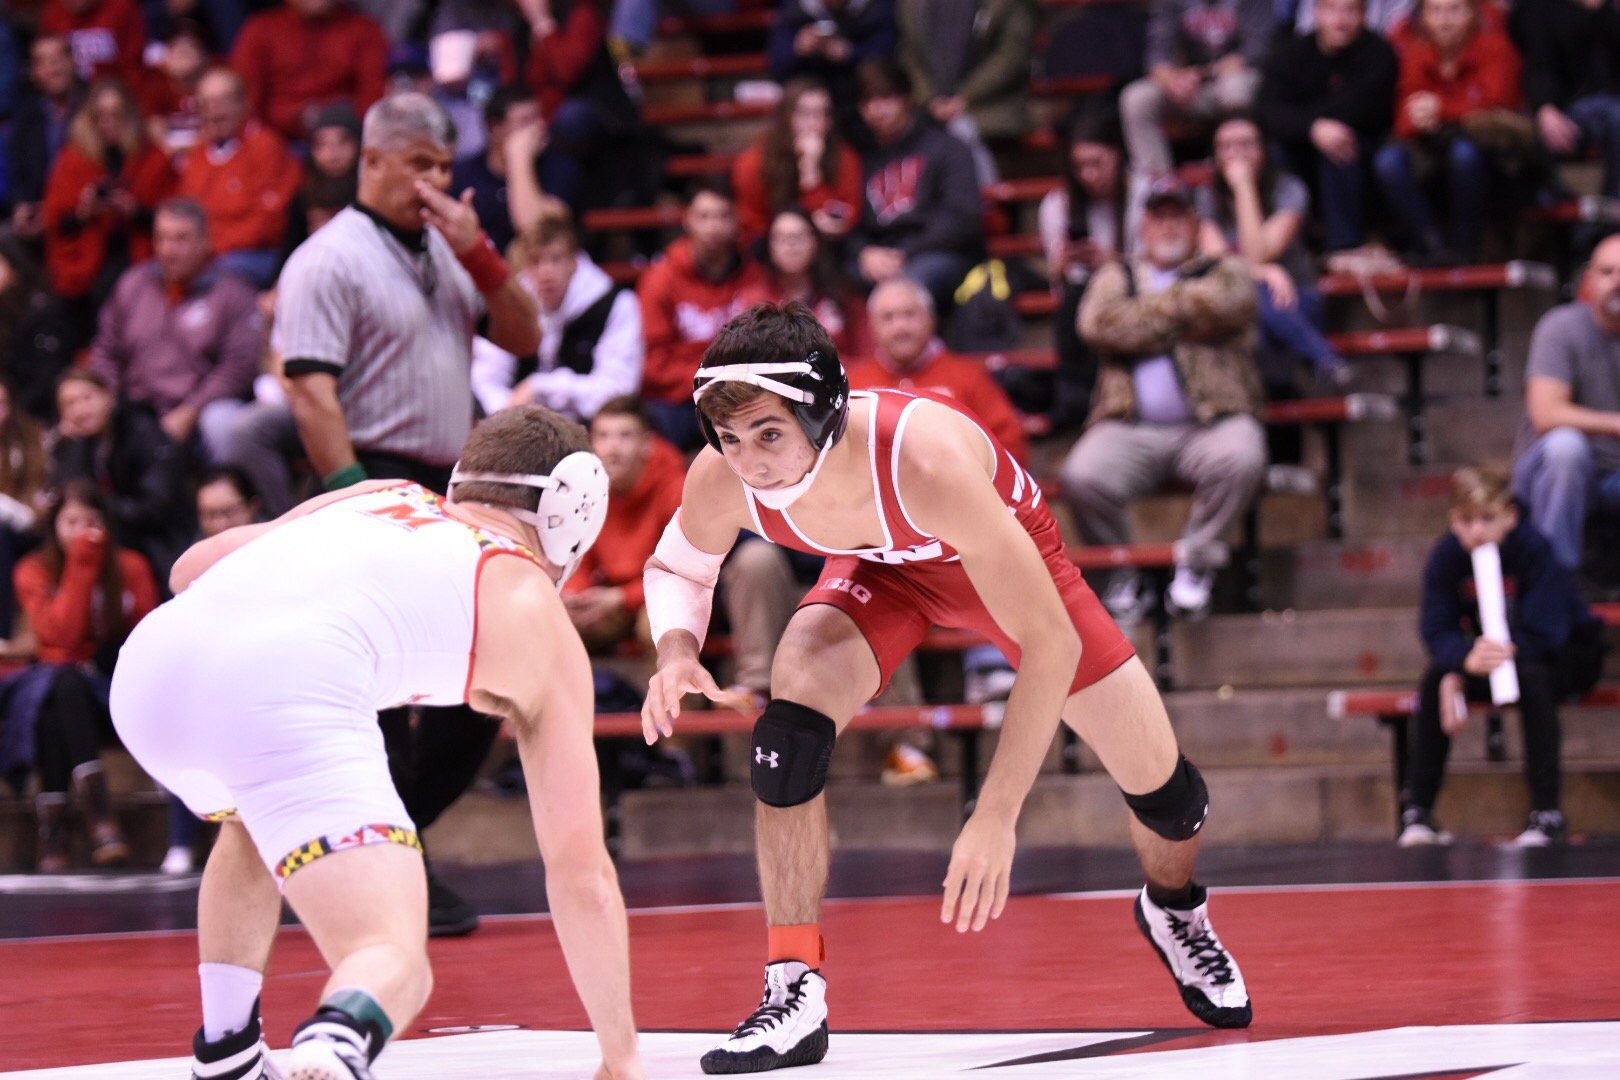 Wrestling: Wisconsin primed for strong season after new additions via